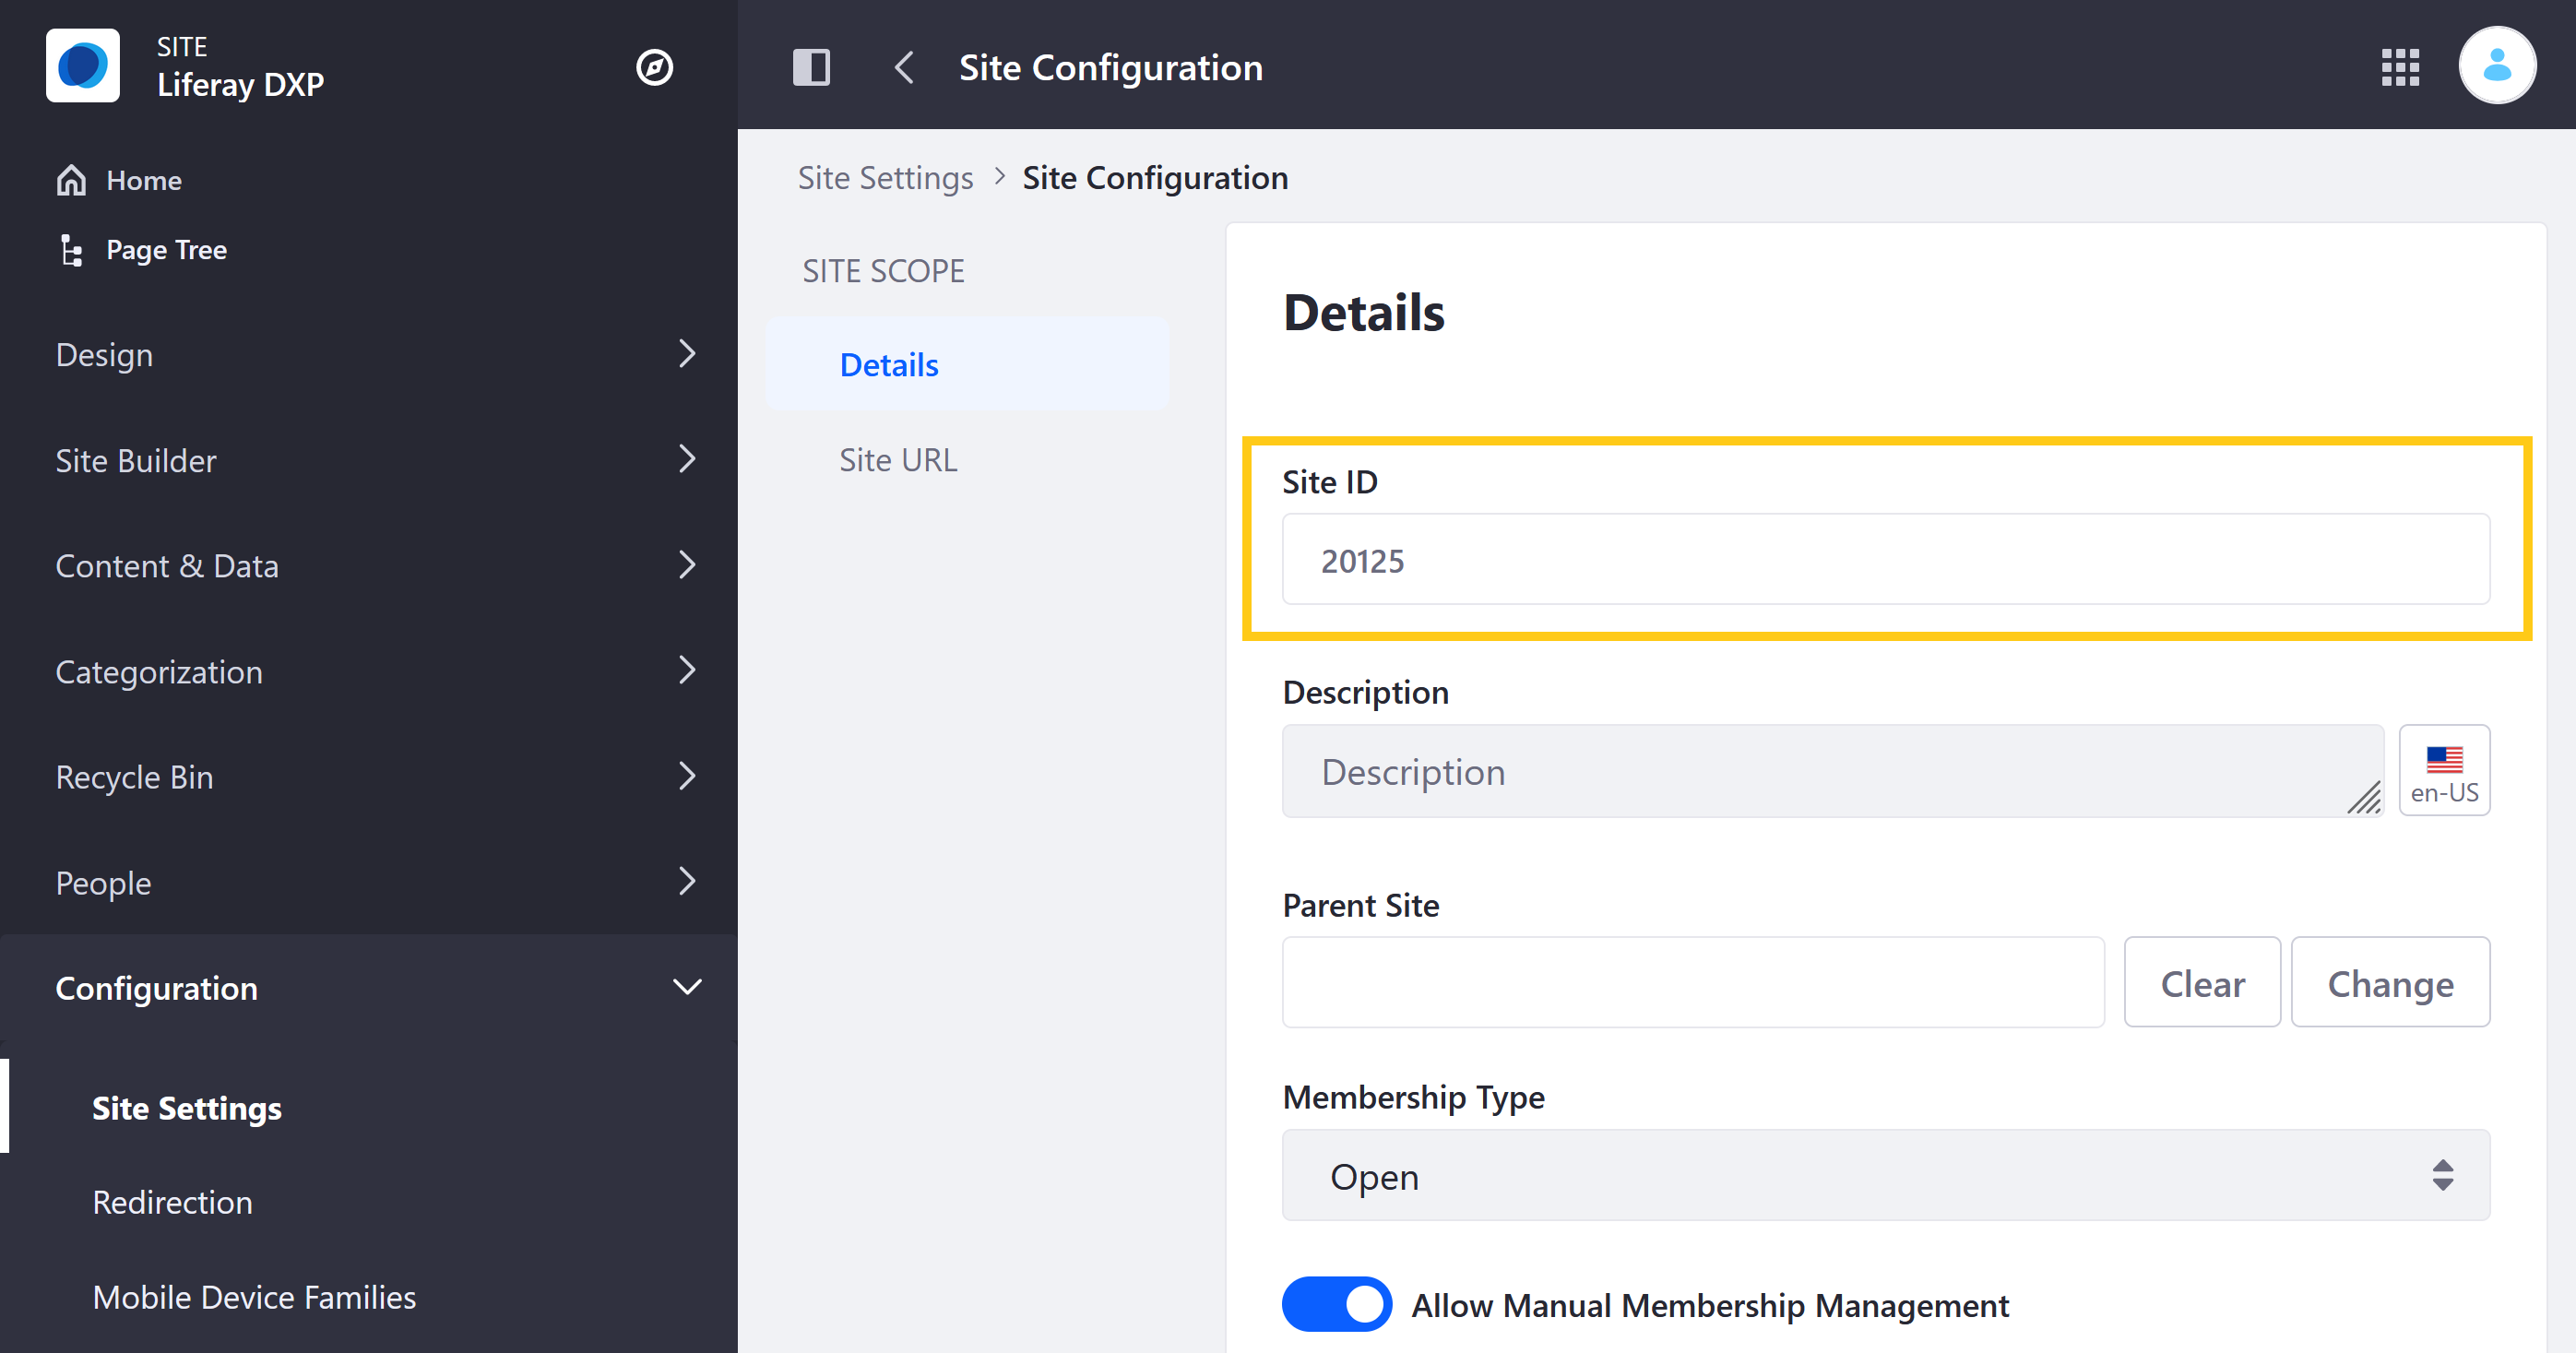 Find the site ID under the Site Configuration settings.